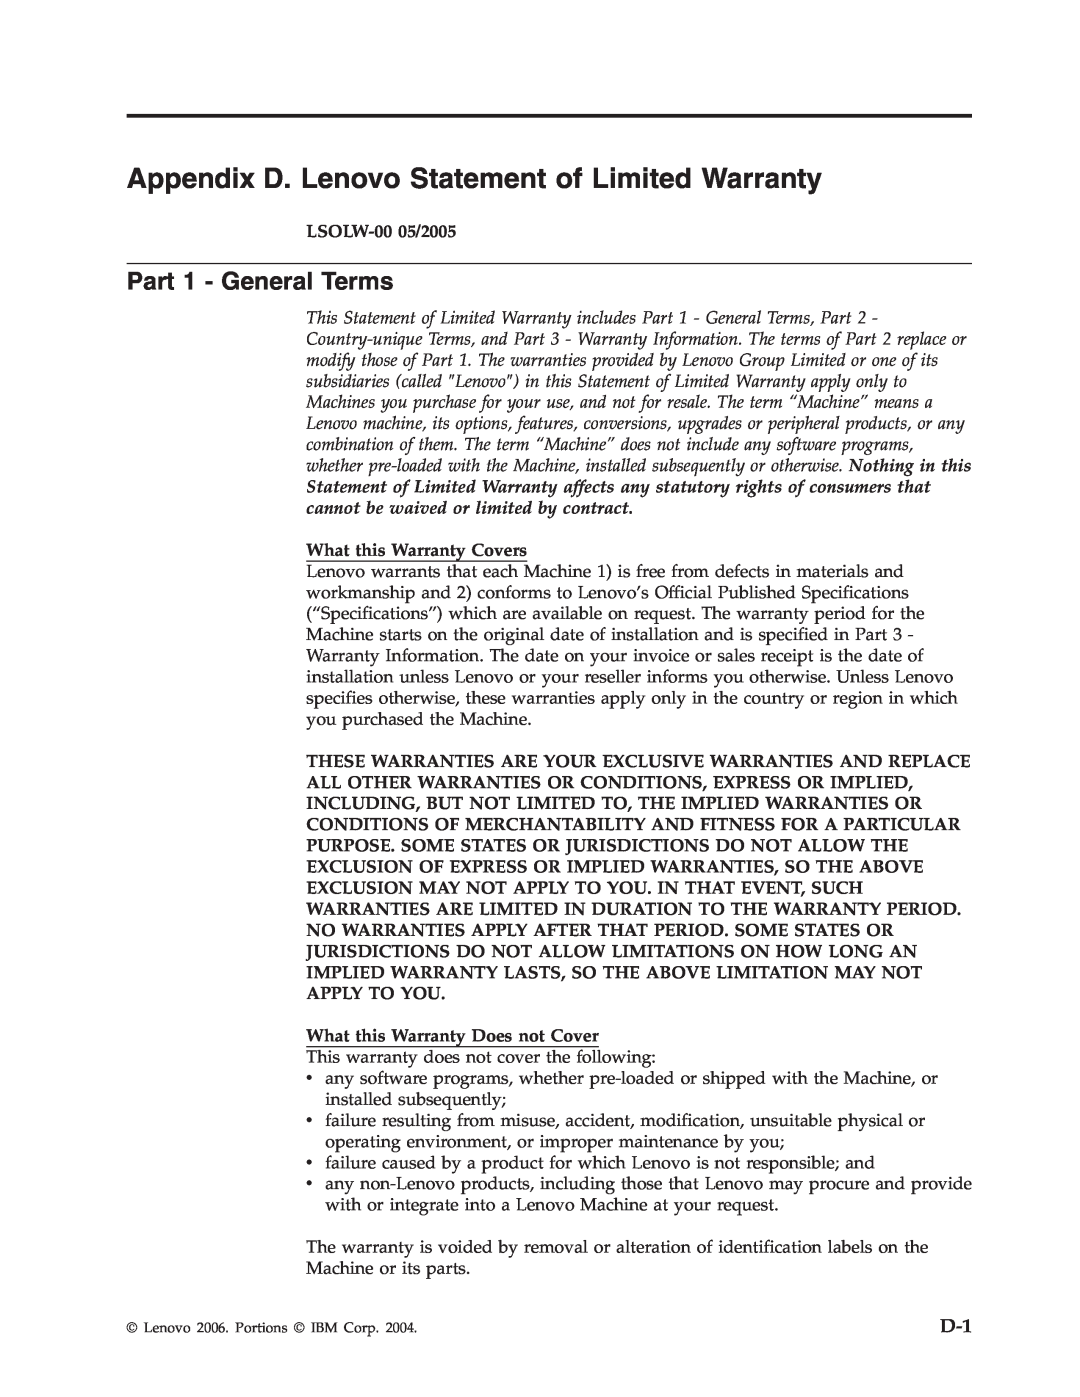 Lenovo 40Y8710 manual Appendix D. Lenovo Statement of Limited Warranty, Part 1 - General Terms, LSOLW-0005/2005 